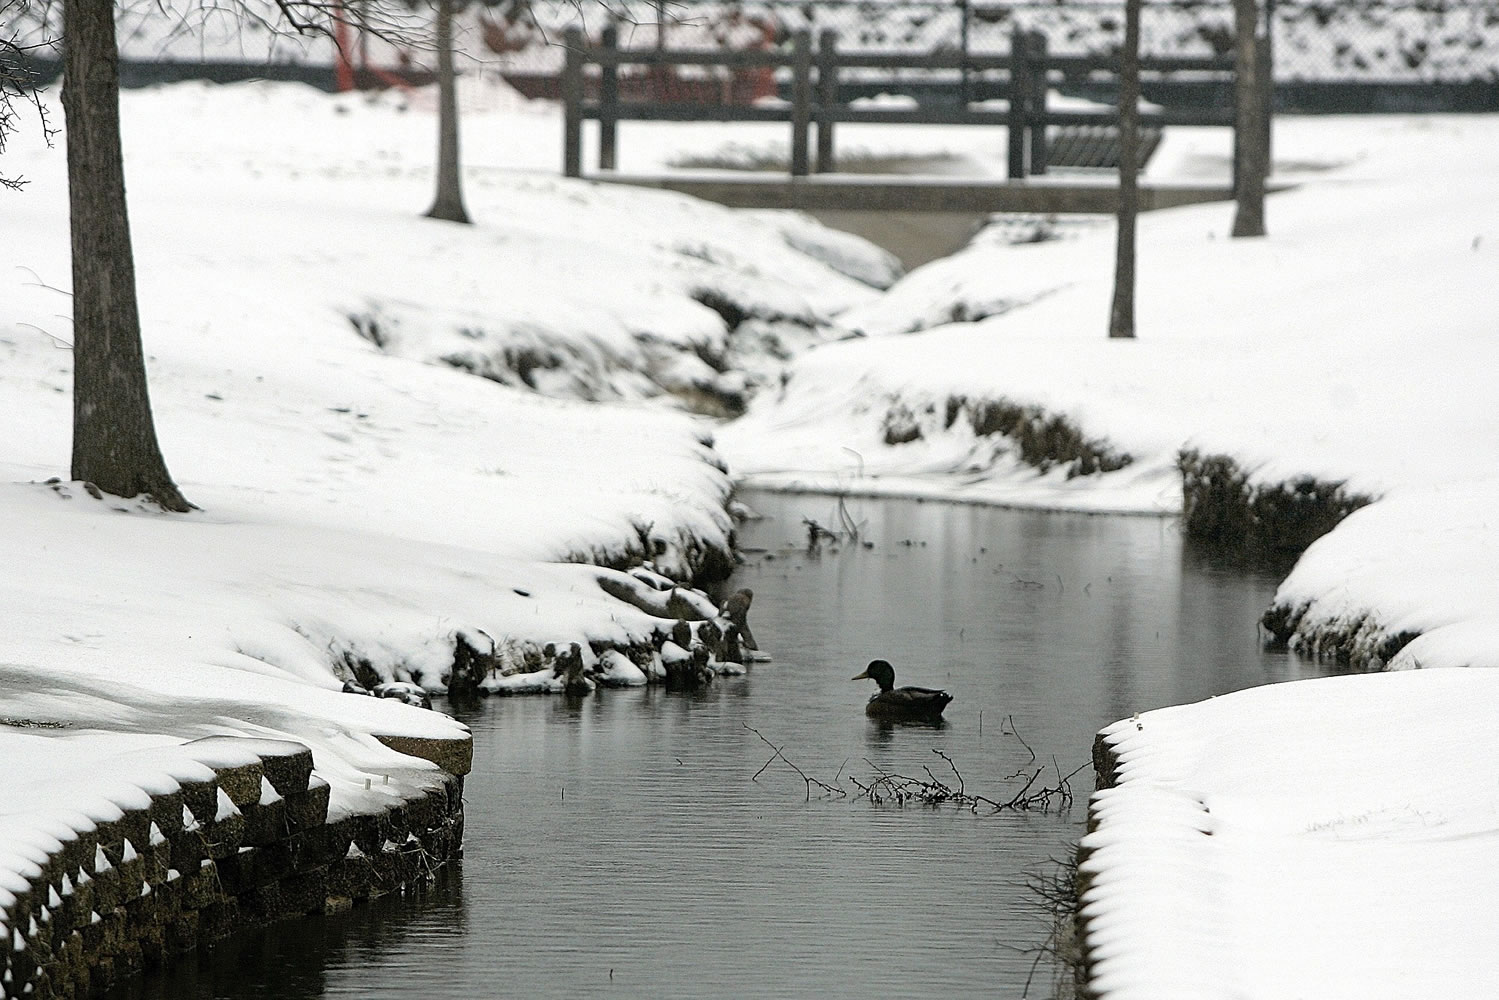 A lone duck swims Saturday in a small creek in Hurst, Texas.